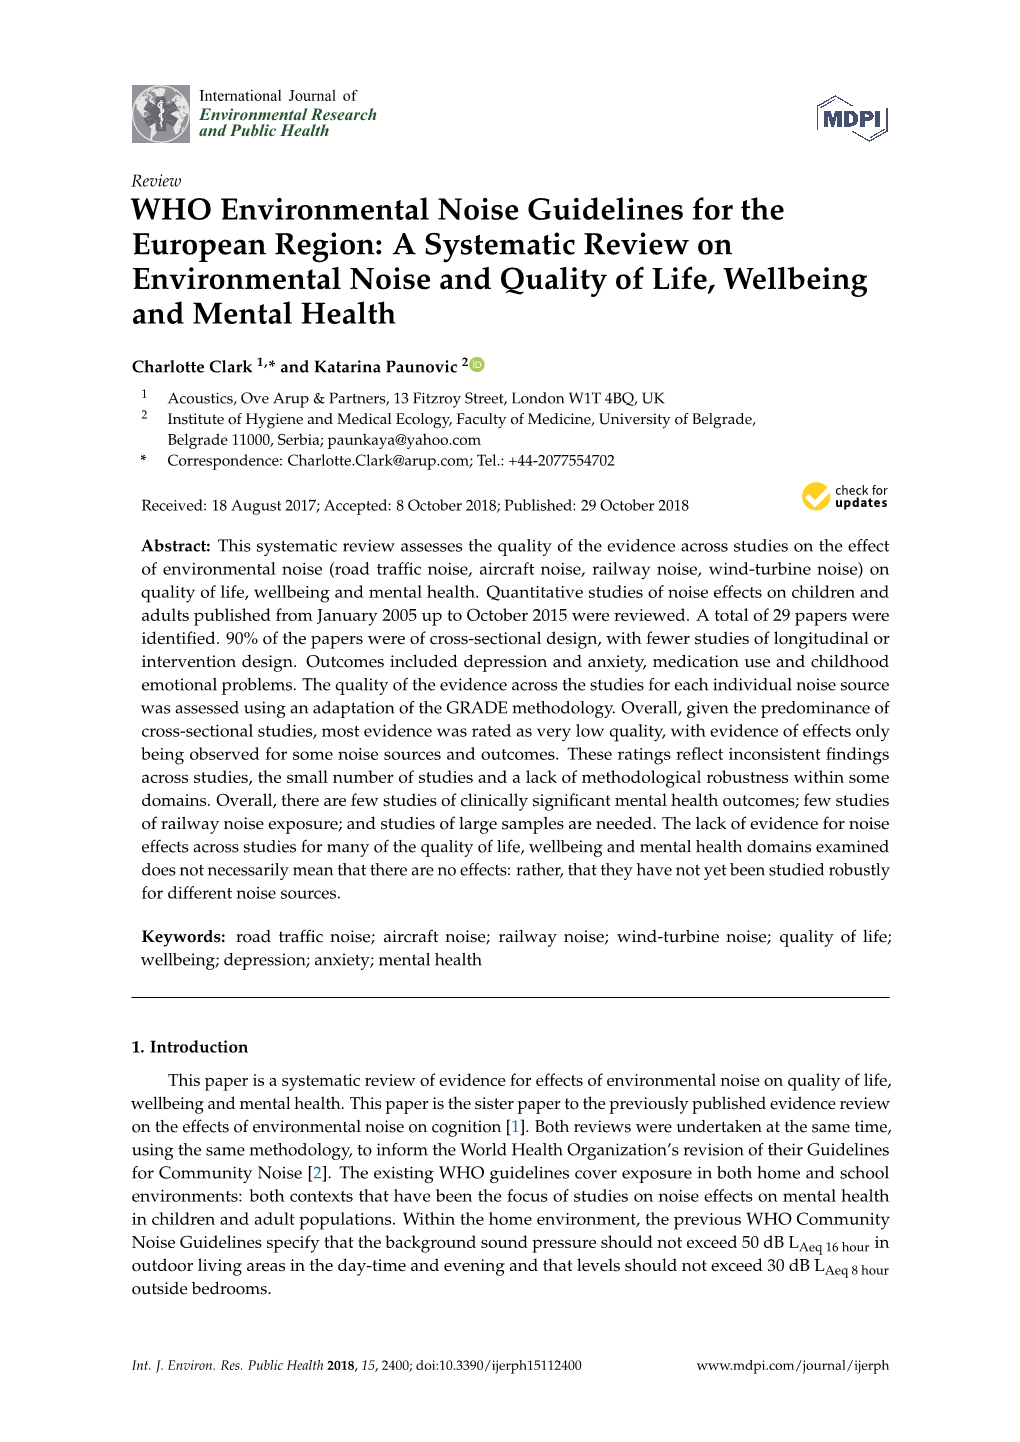 A Systematic Review on Environmental Noise and Quality of Life, Wellbeing and Mental Health